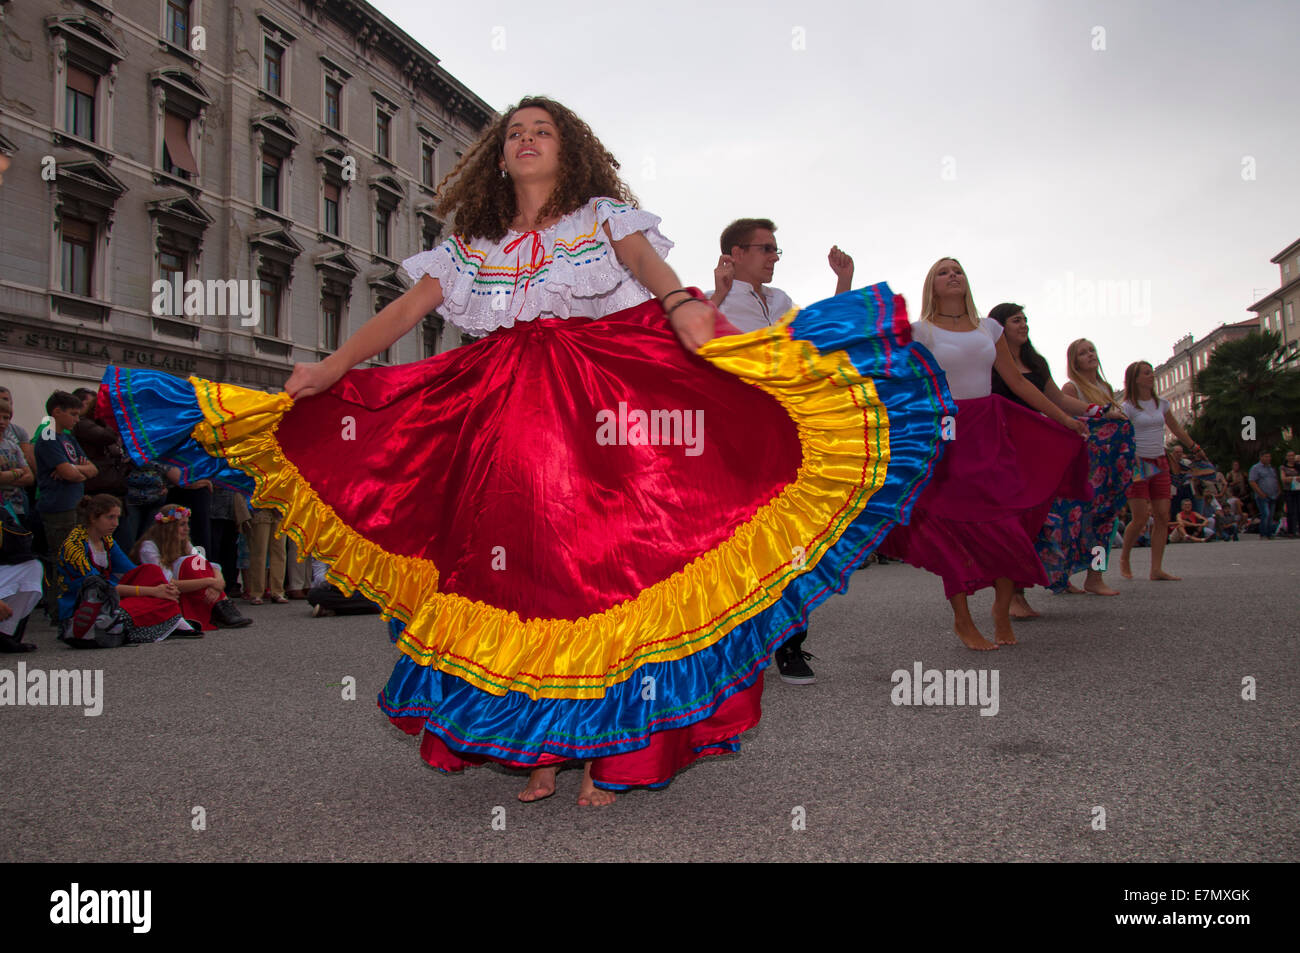 Trieste, Italy. 21st September, 2014. Students from United World Colleges - UWC Adriatic - presented a pageant of International dancing in Piazza Sant'Antonio Nuovo in this Adriatic coastal city to mark The International Day of Peace. Credit:  Richard Wayman/Alamy Live News Stock Photo